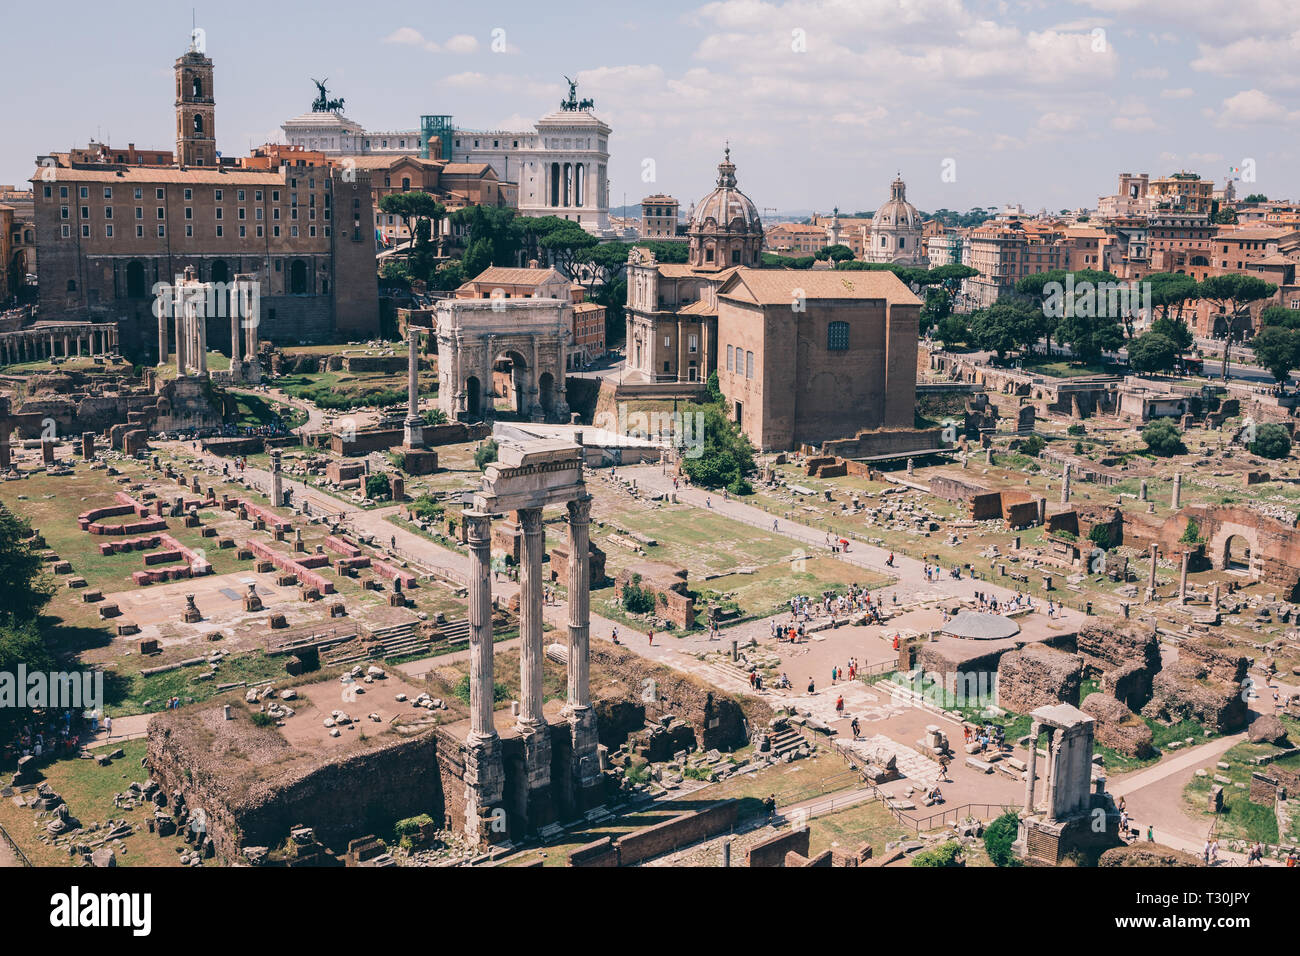 Panoramic view of Roman forum, also known by Forum Romanum or Foro Romano from Palatine Hill. It is a forum surrounded by ruins of ancient government  Stock Photo